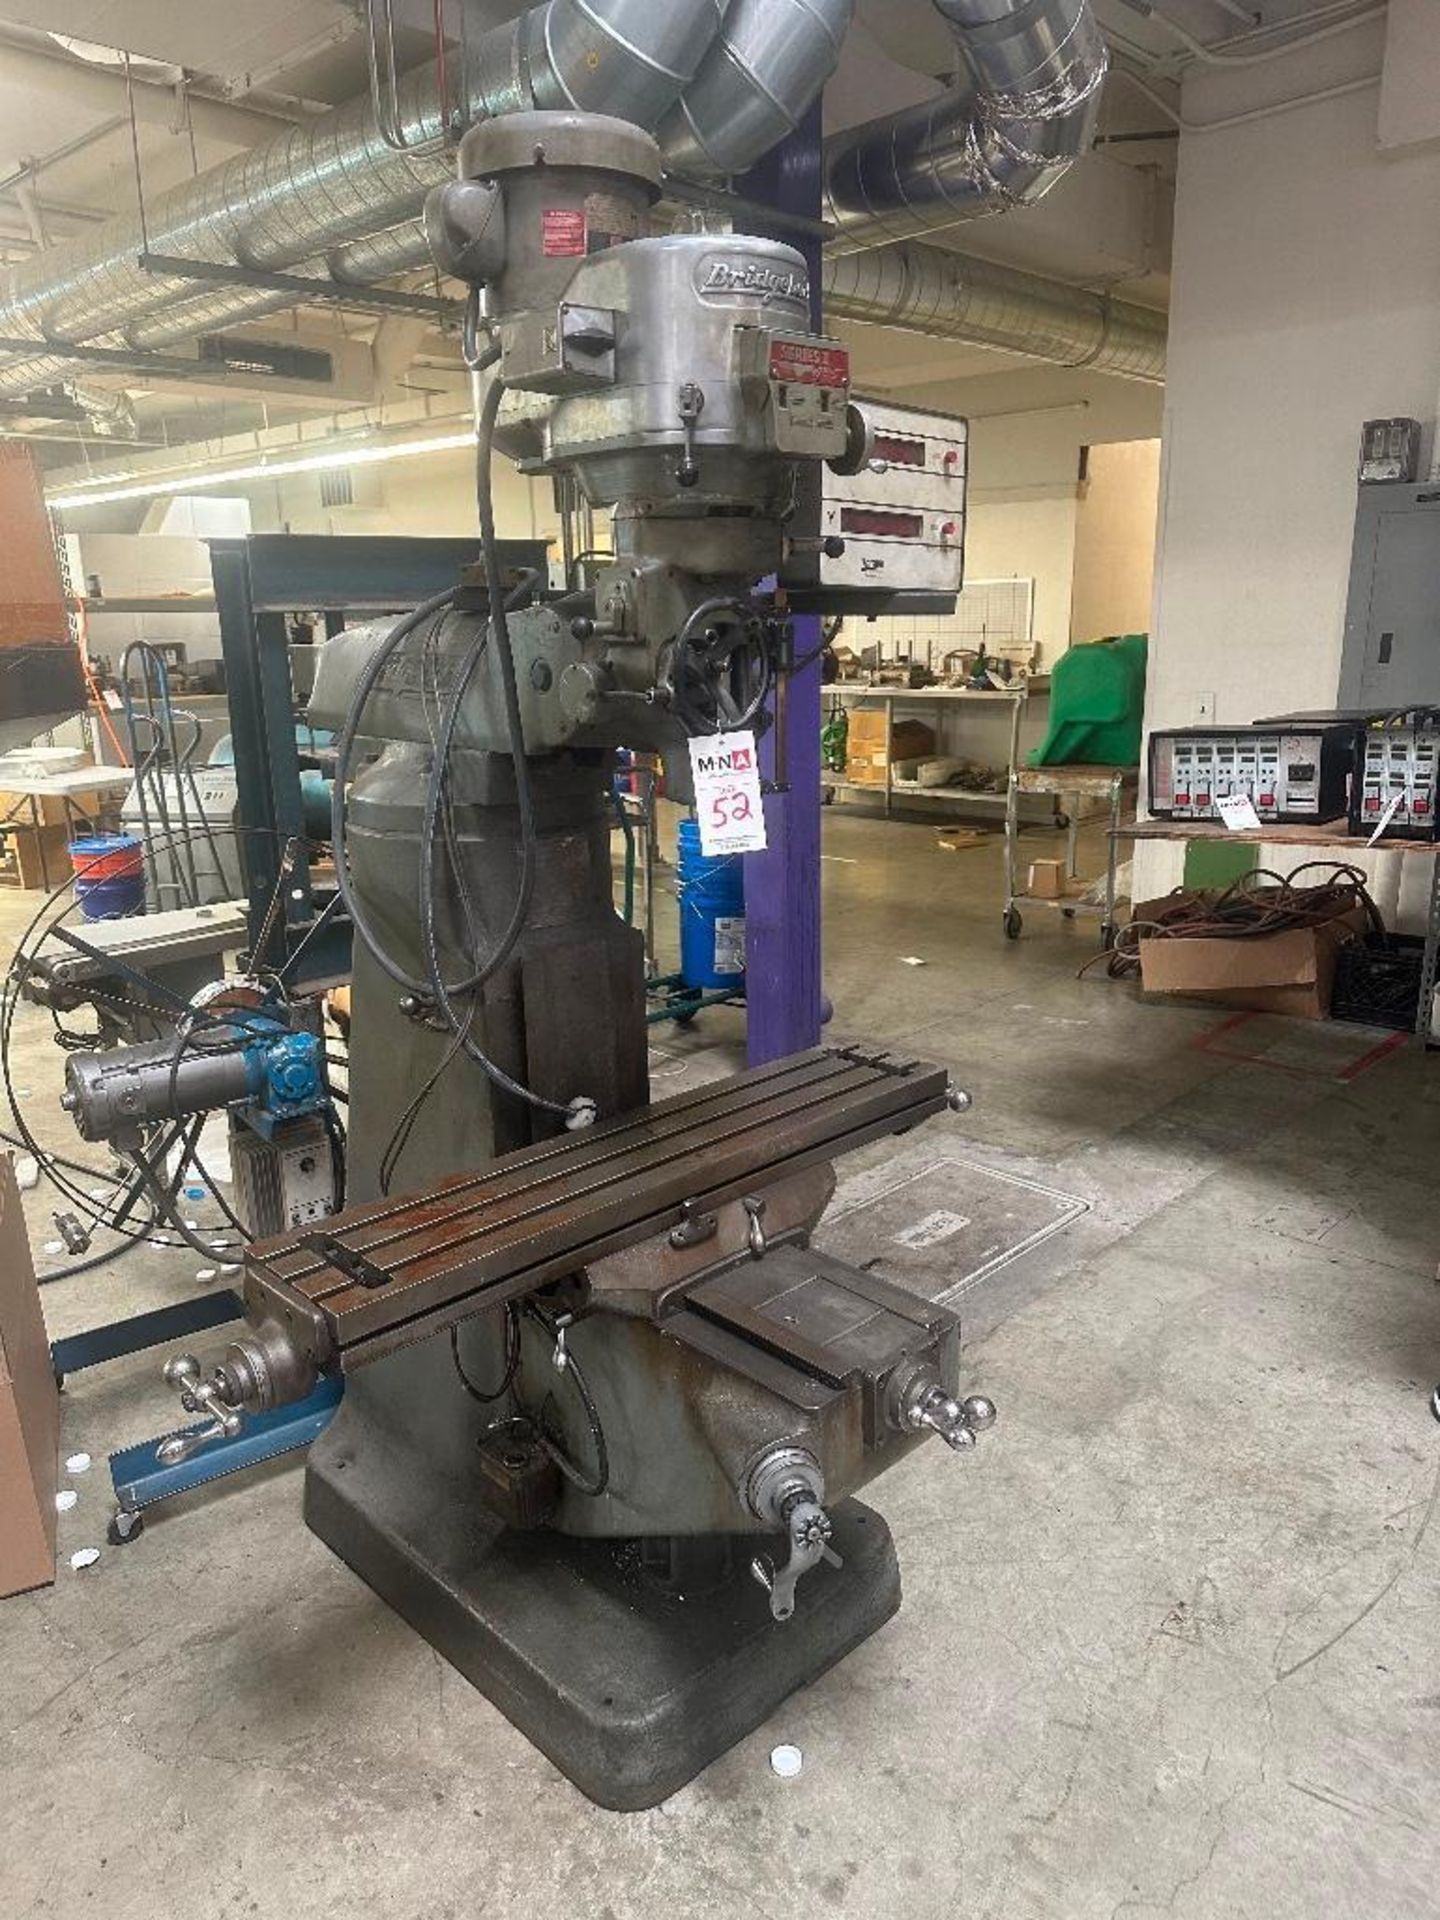 Bridgeport Series 1 Vertical Mill, 2 HP, 9" x 42" Table, Sargon D.R.O. - Image 3 of 8